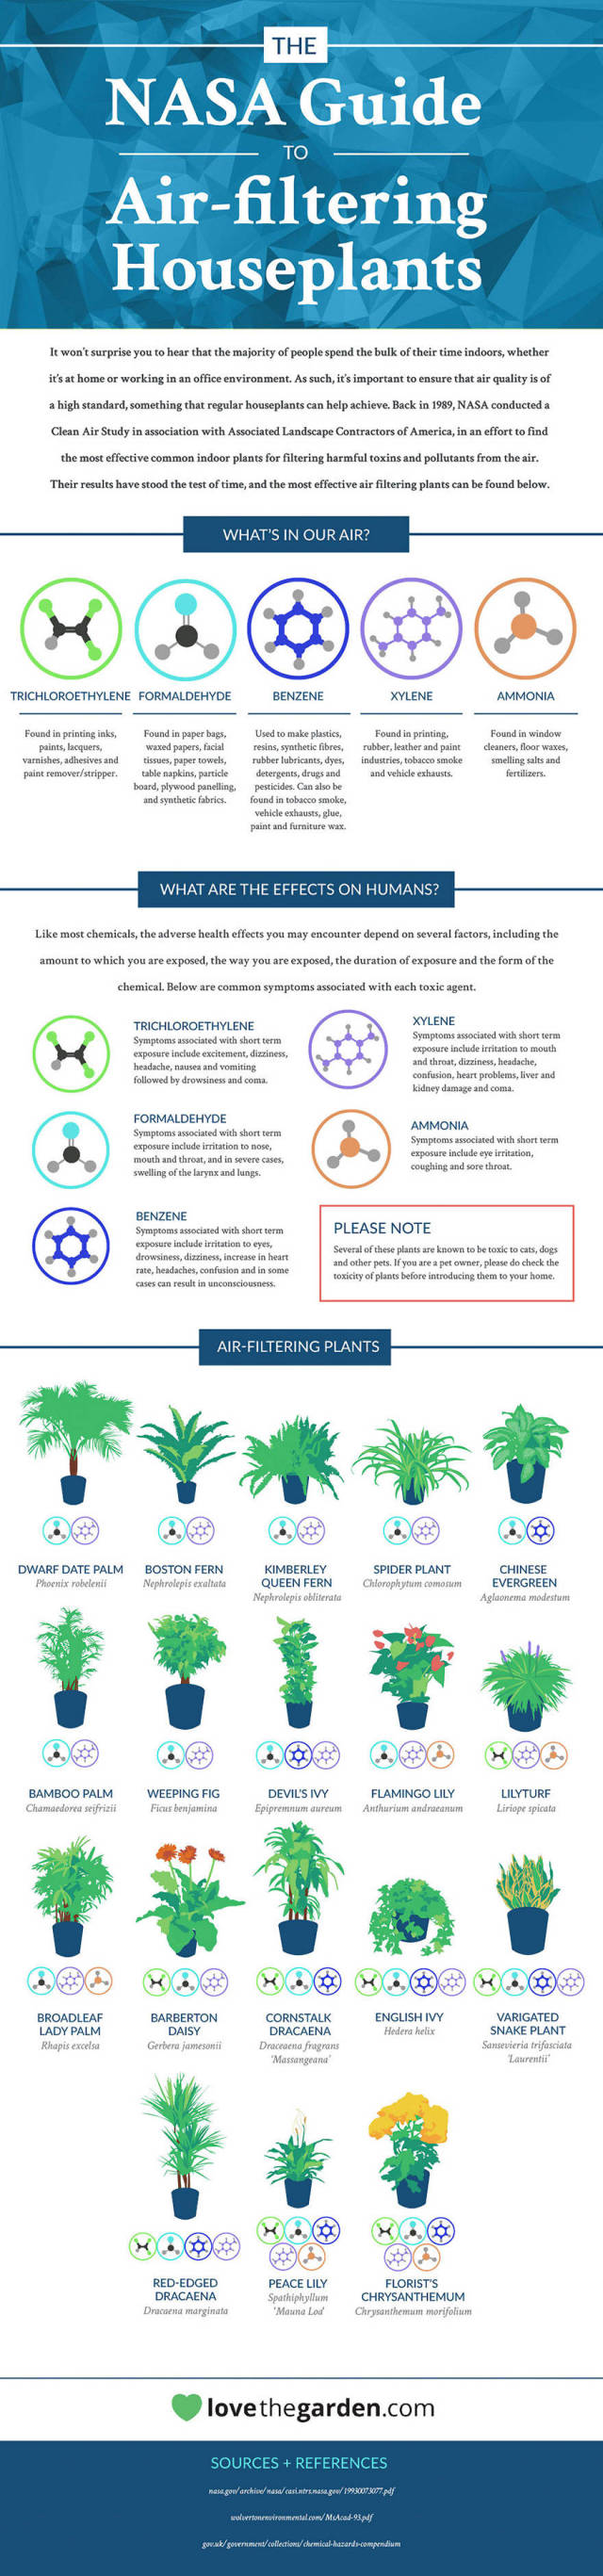 NASA Published A List Of Air-Filtering Plants That Are Best For Your Home